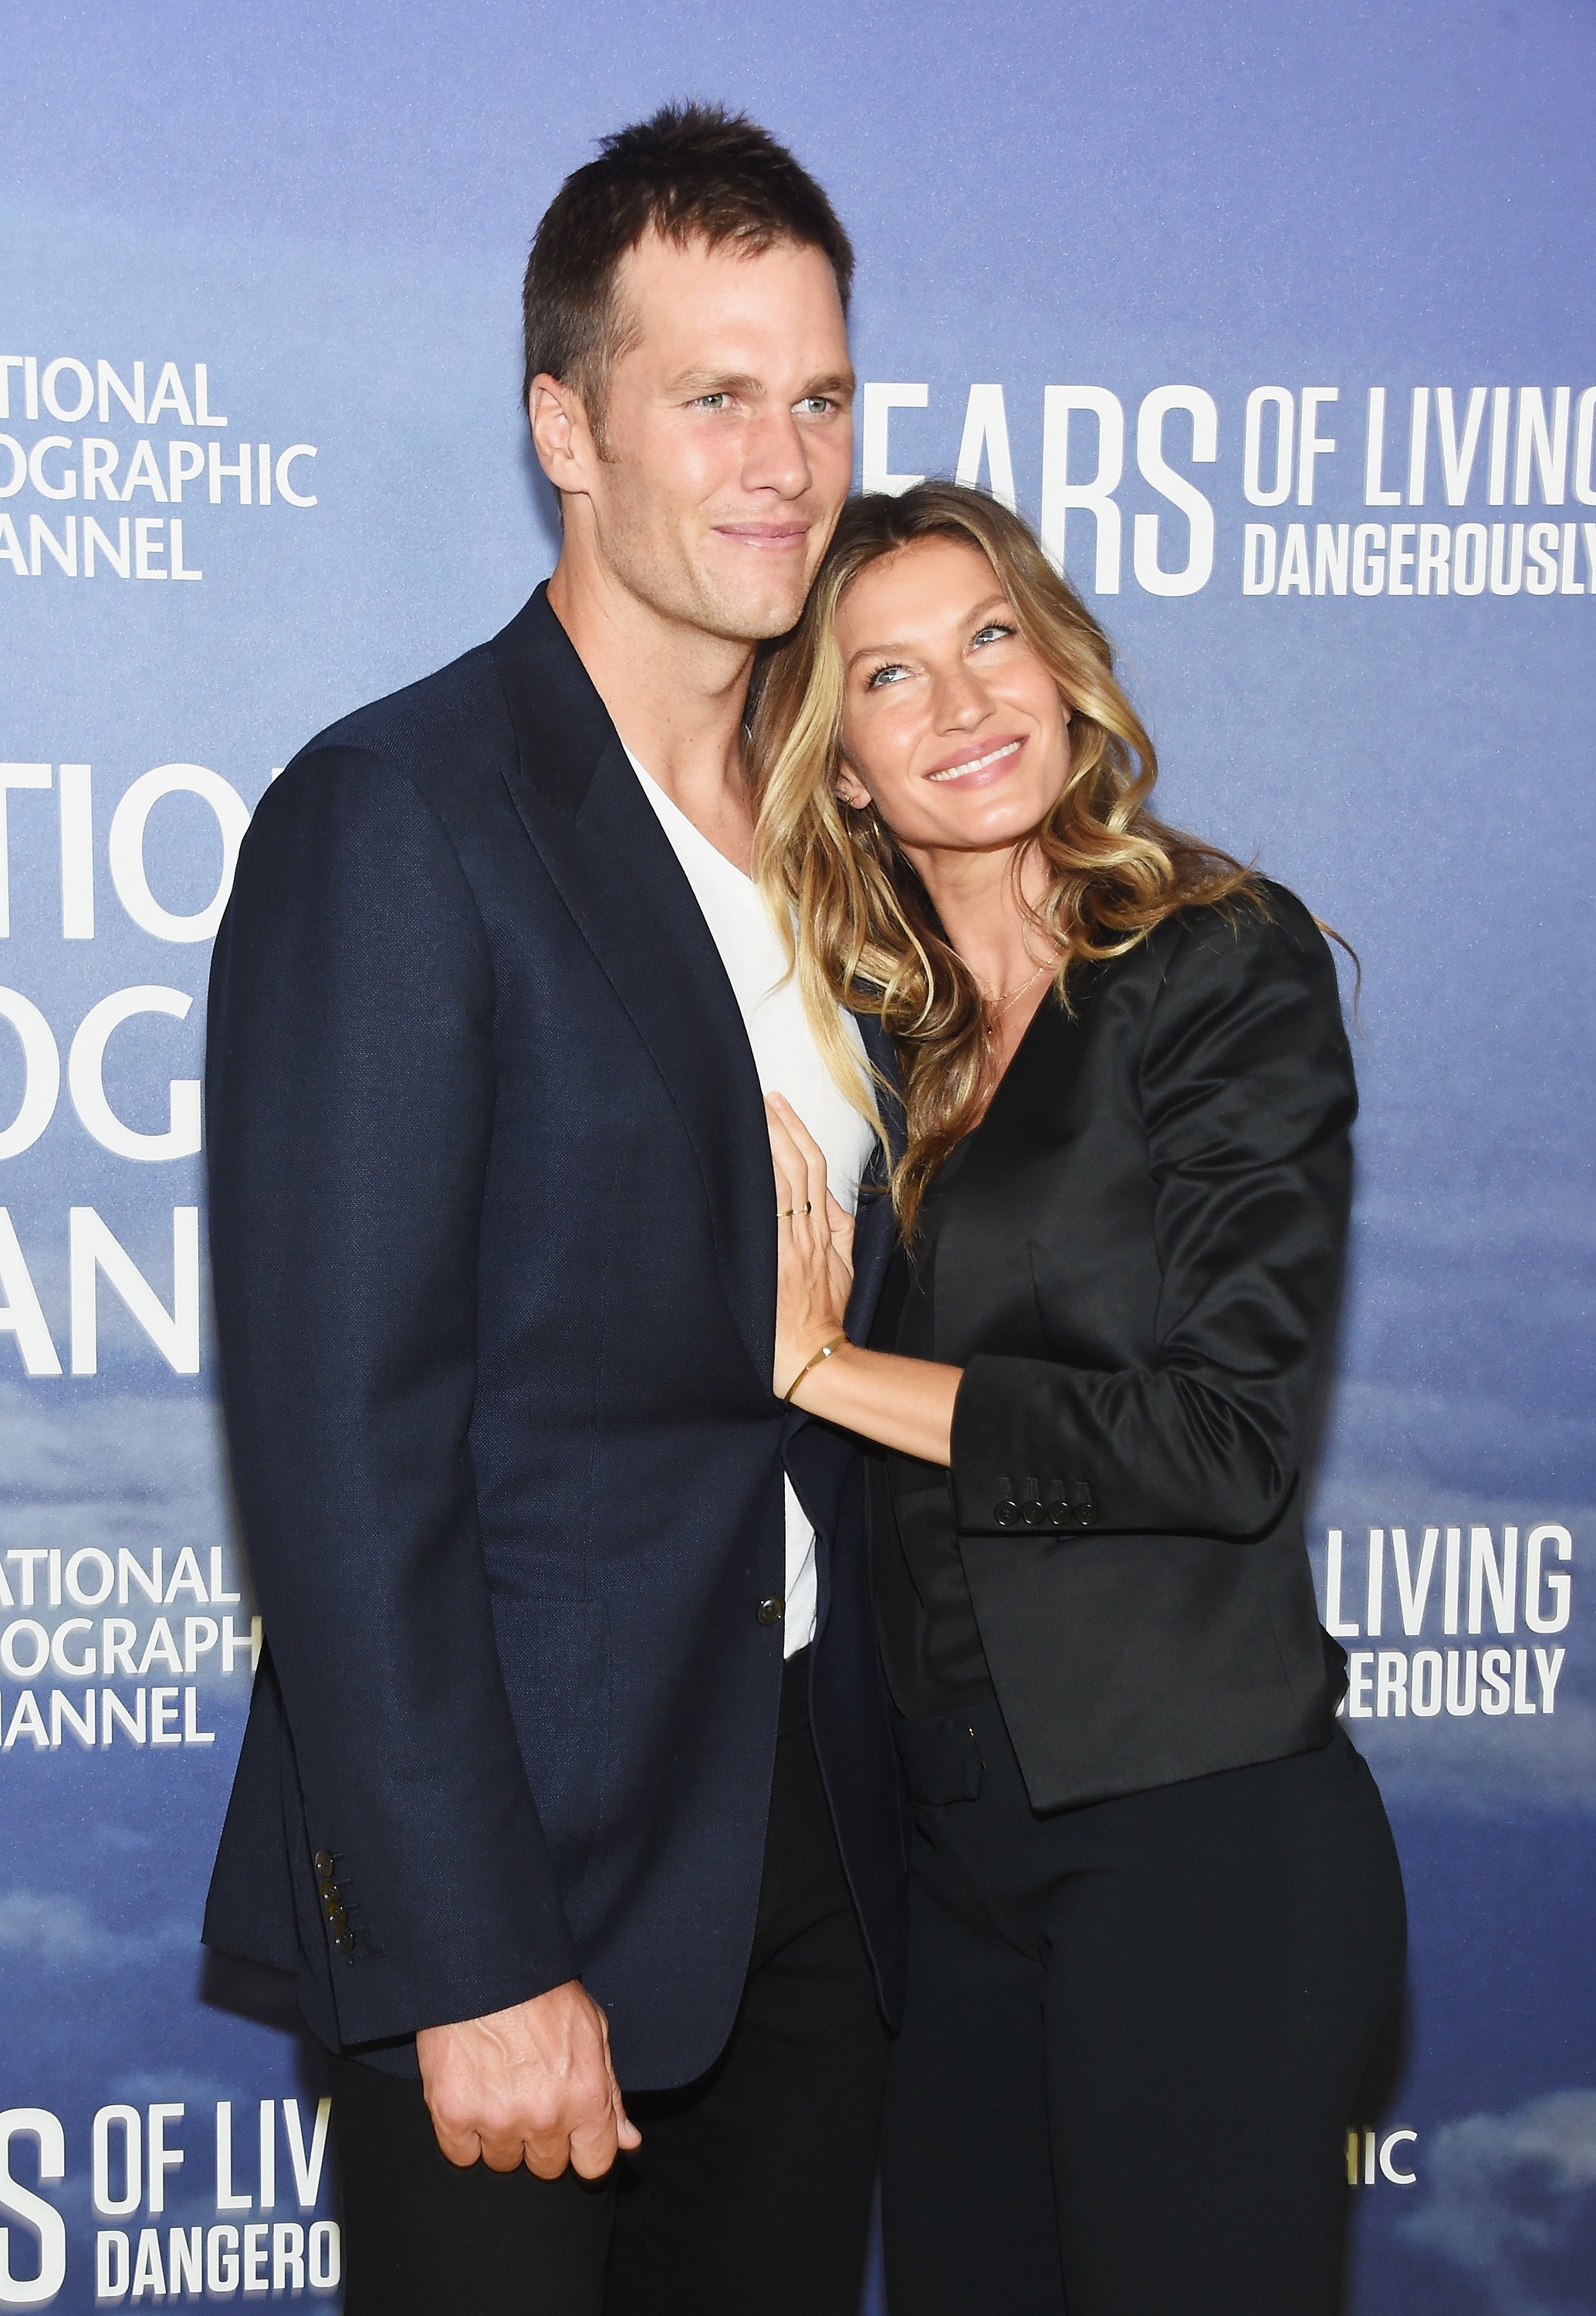 Tom Brady and Gisele Bundchen attend National Geographic's "Years Of Living Dangerously" new season world premiere at the American Museum of Natural History on September 21, 2016, in New York City. | Source: Getty Images